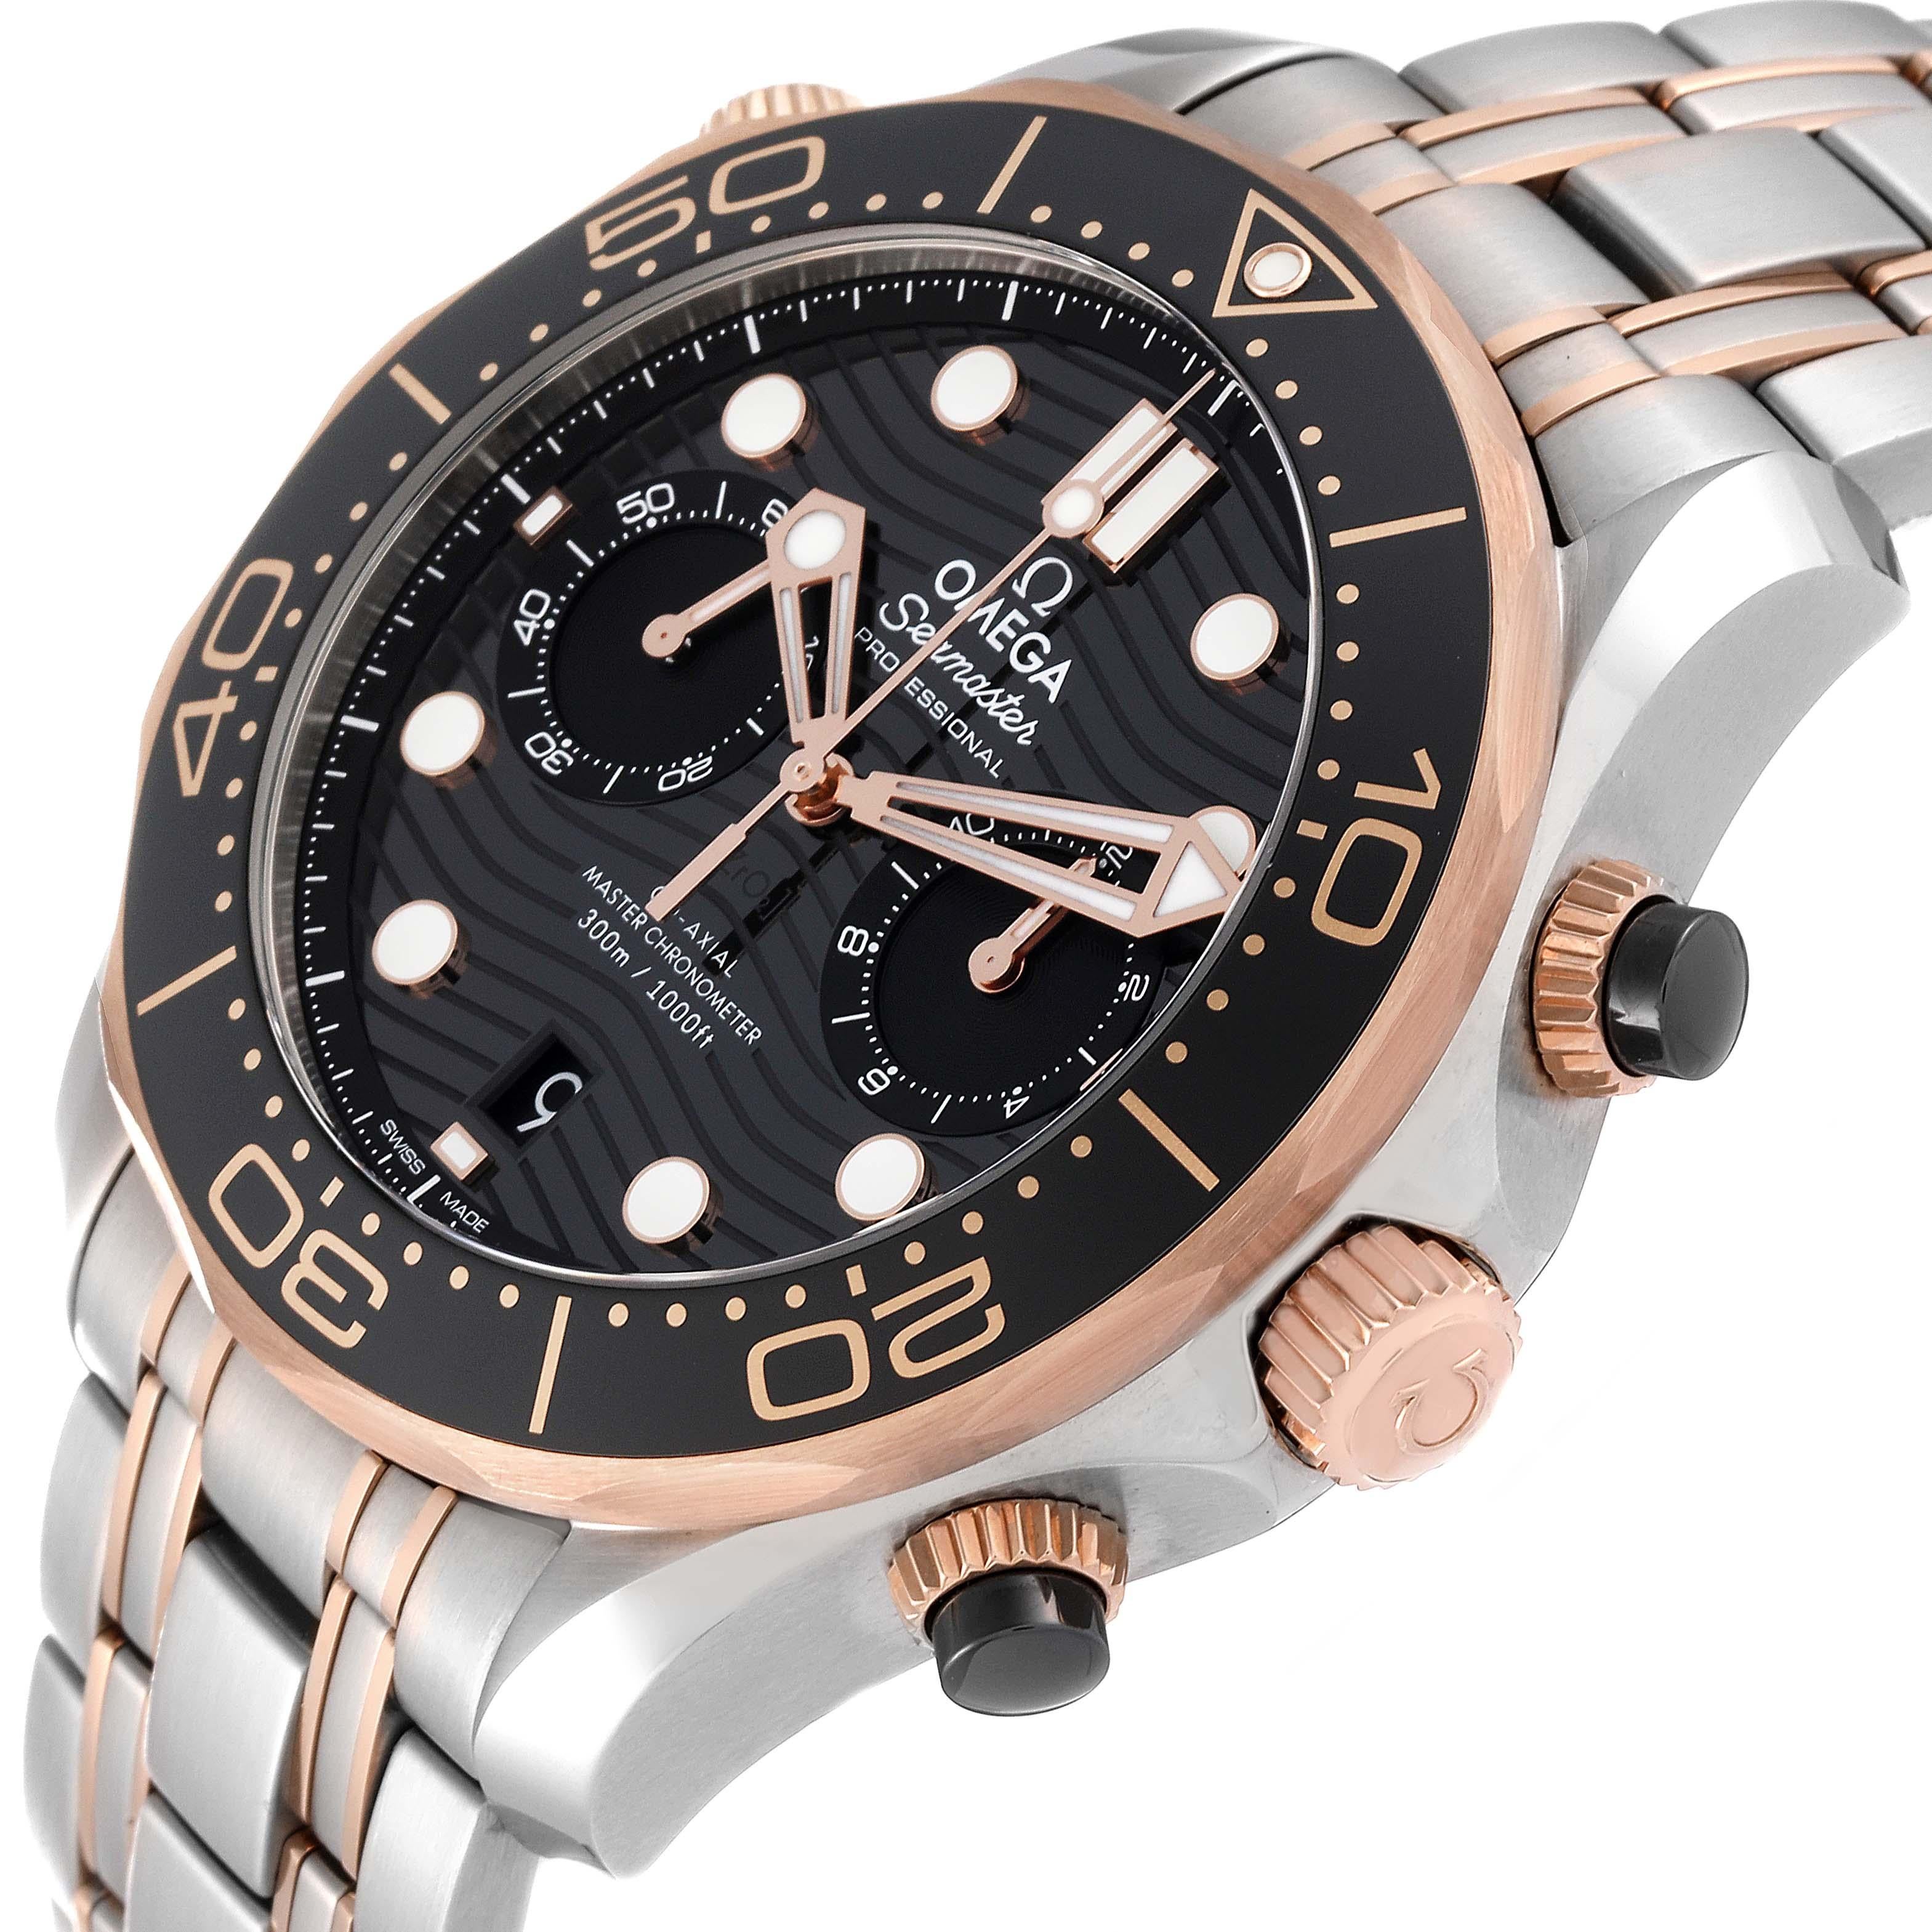 Omega Seamaster Diver Steel Rose Gold Mens Watch 210.20.44.51.01.001 Box Card For Sale 4